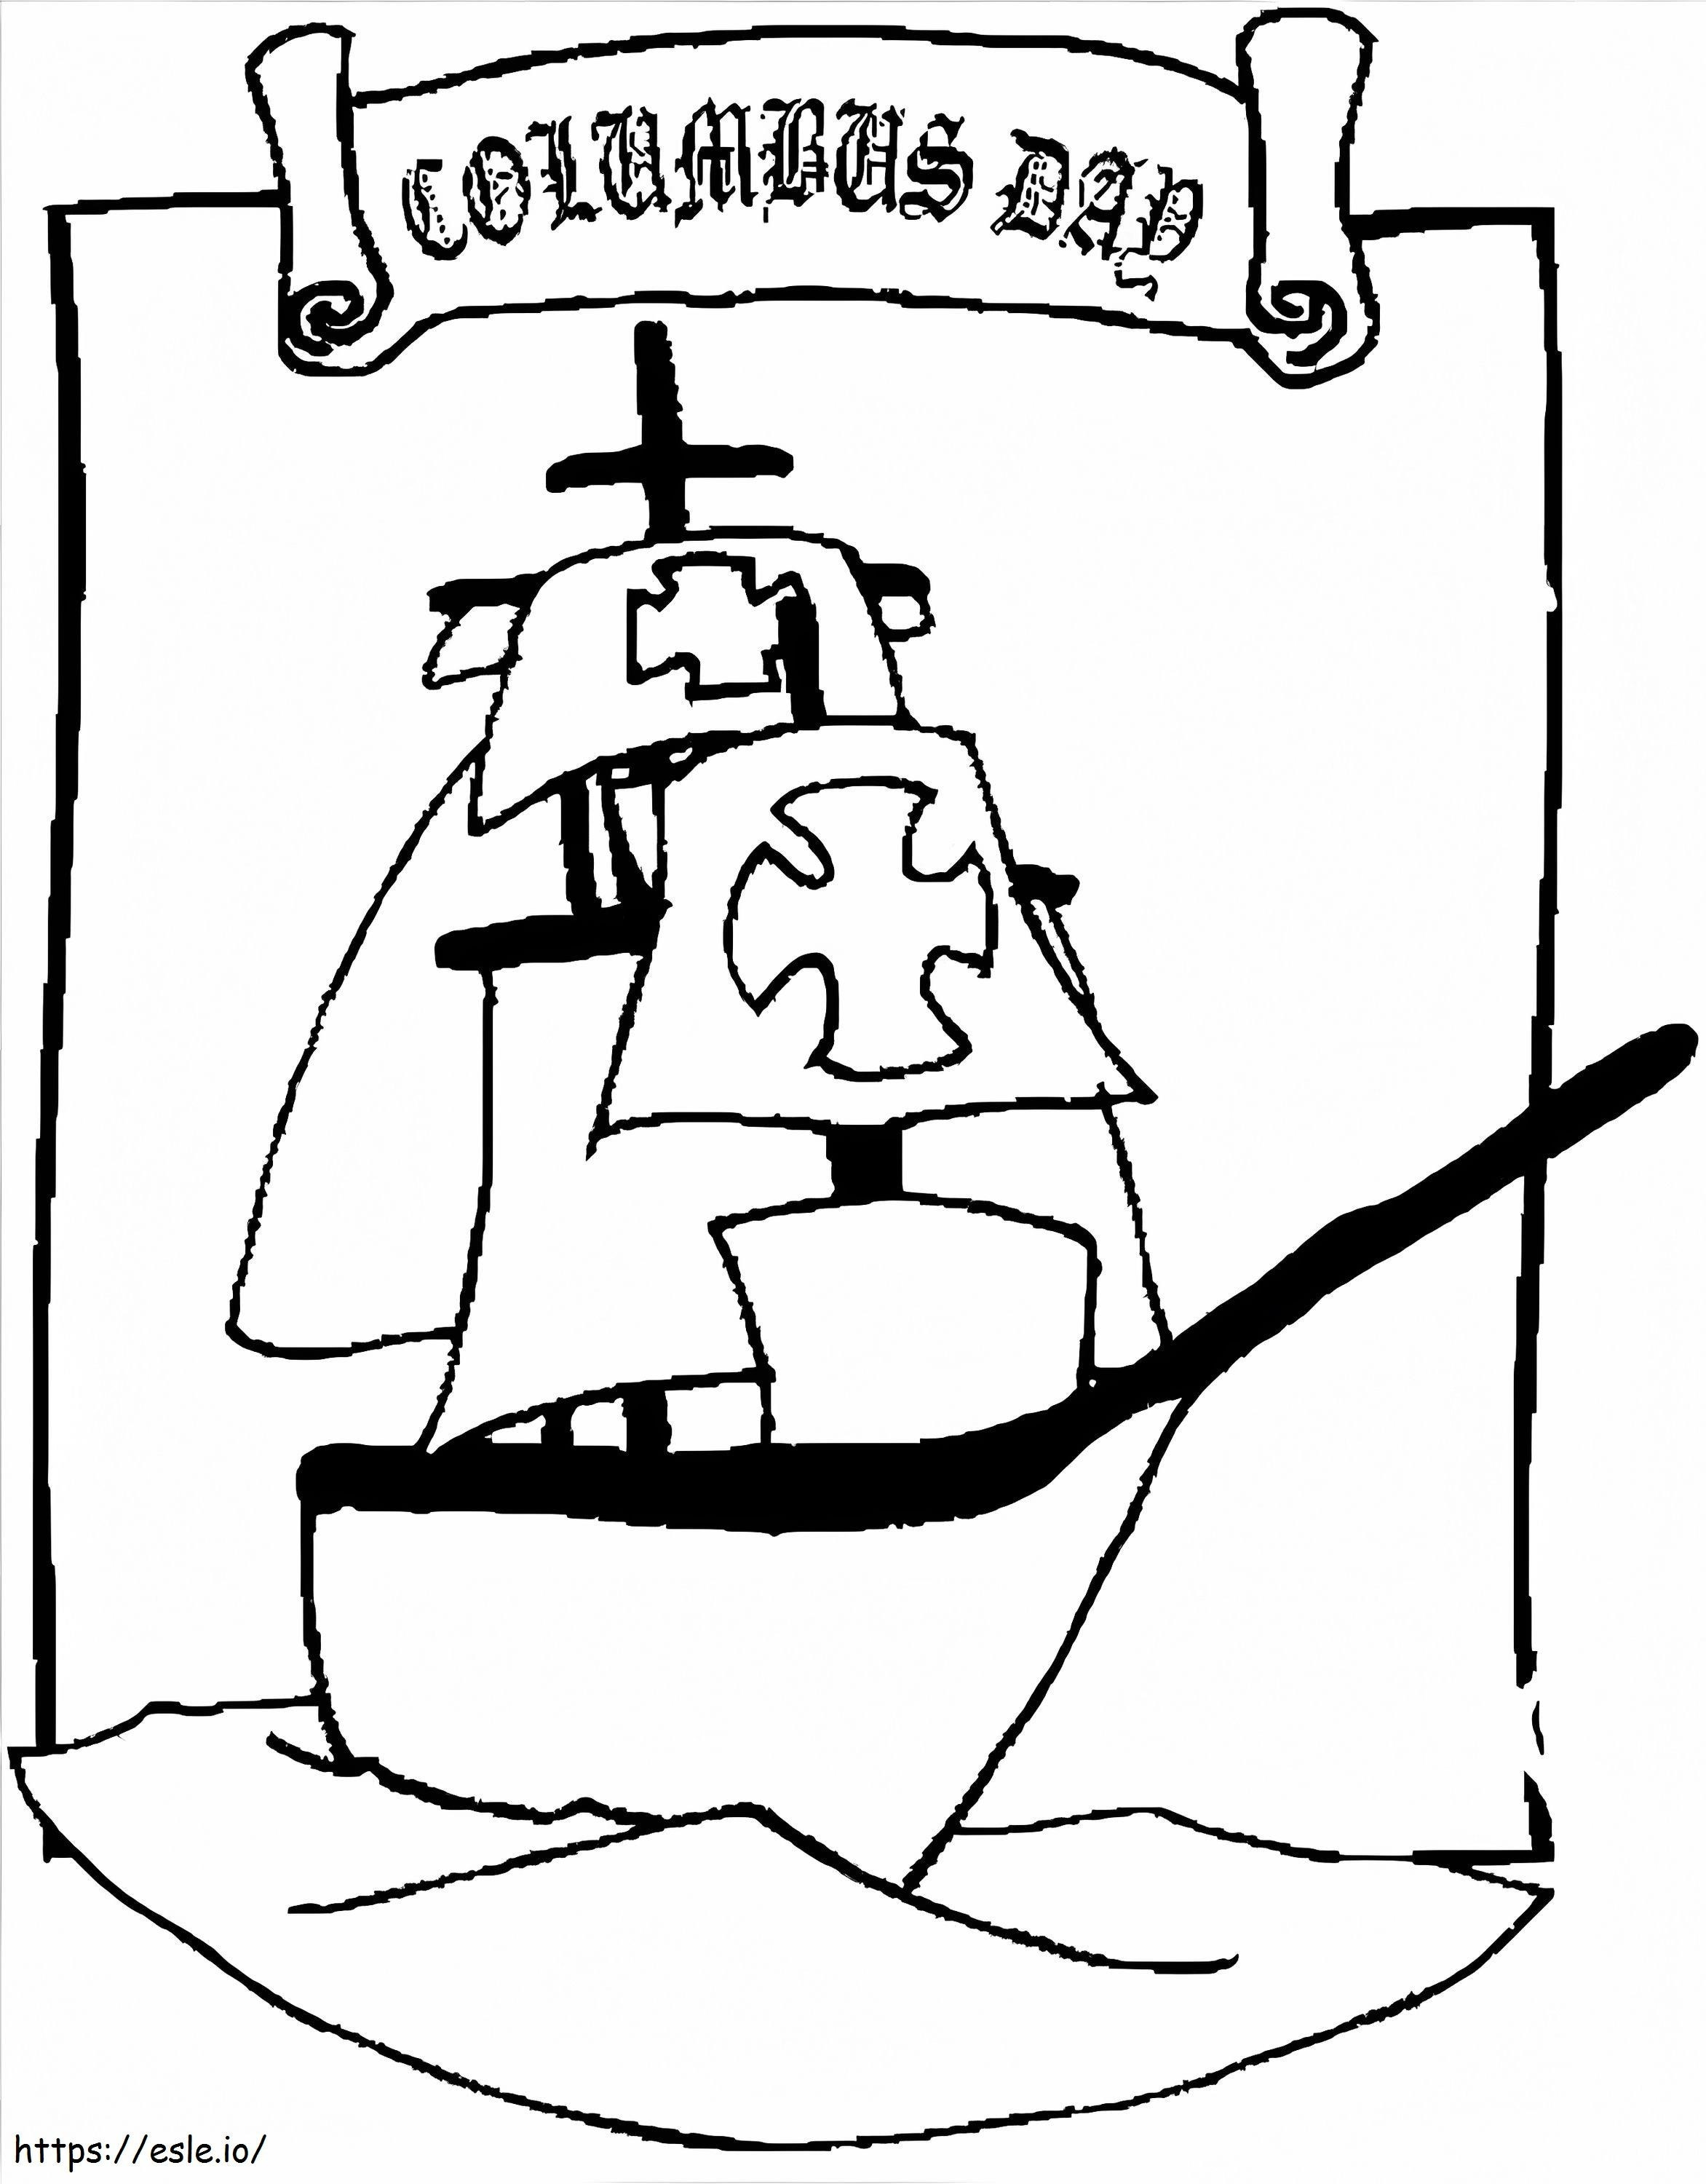 Columbus Day 3 coloring page